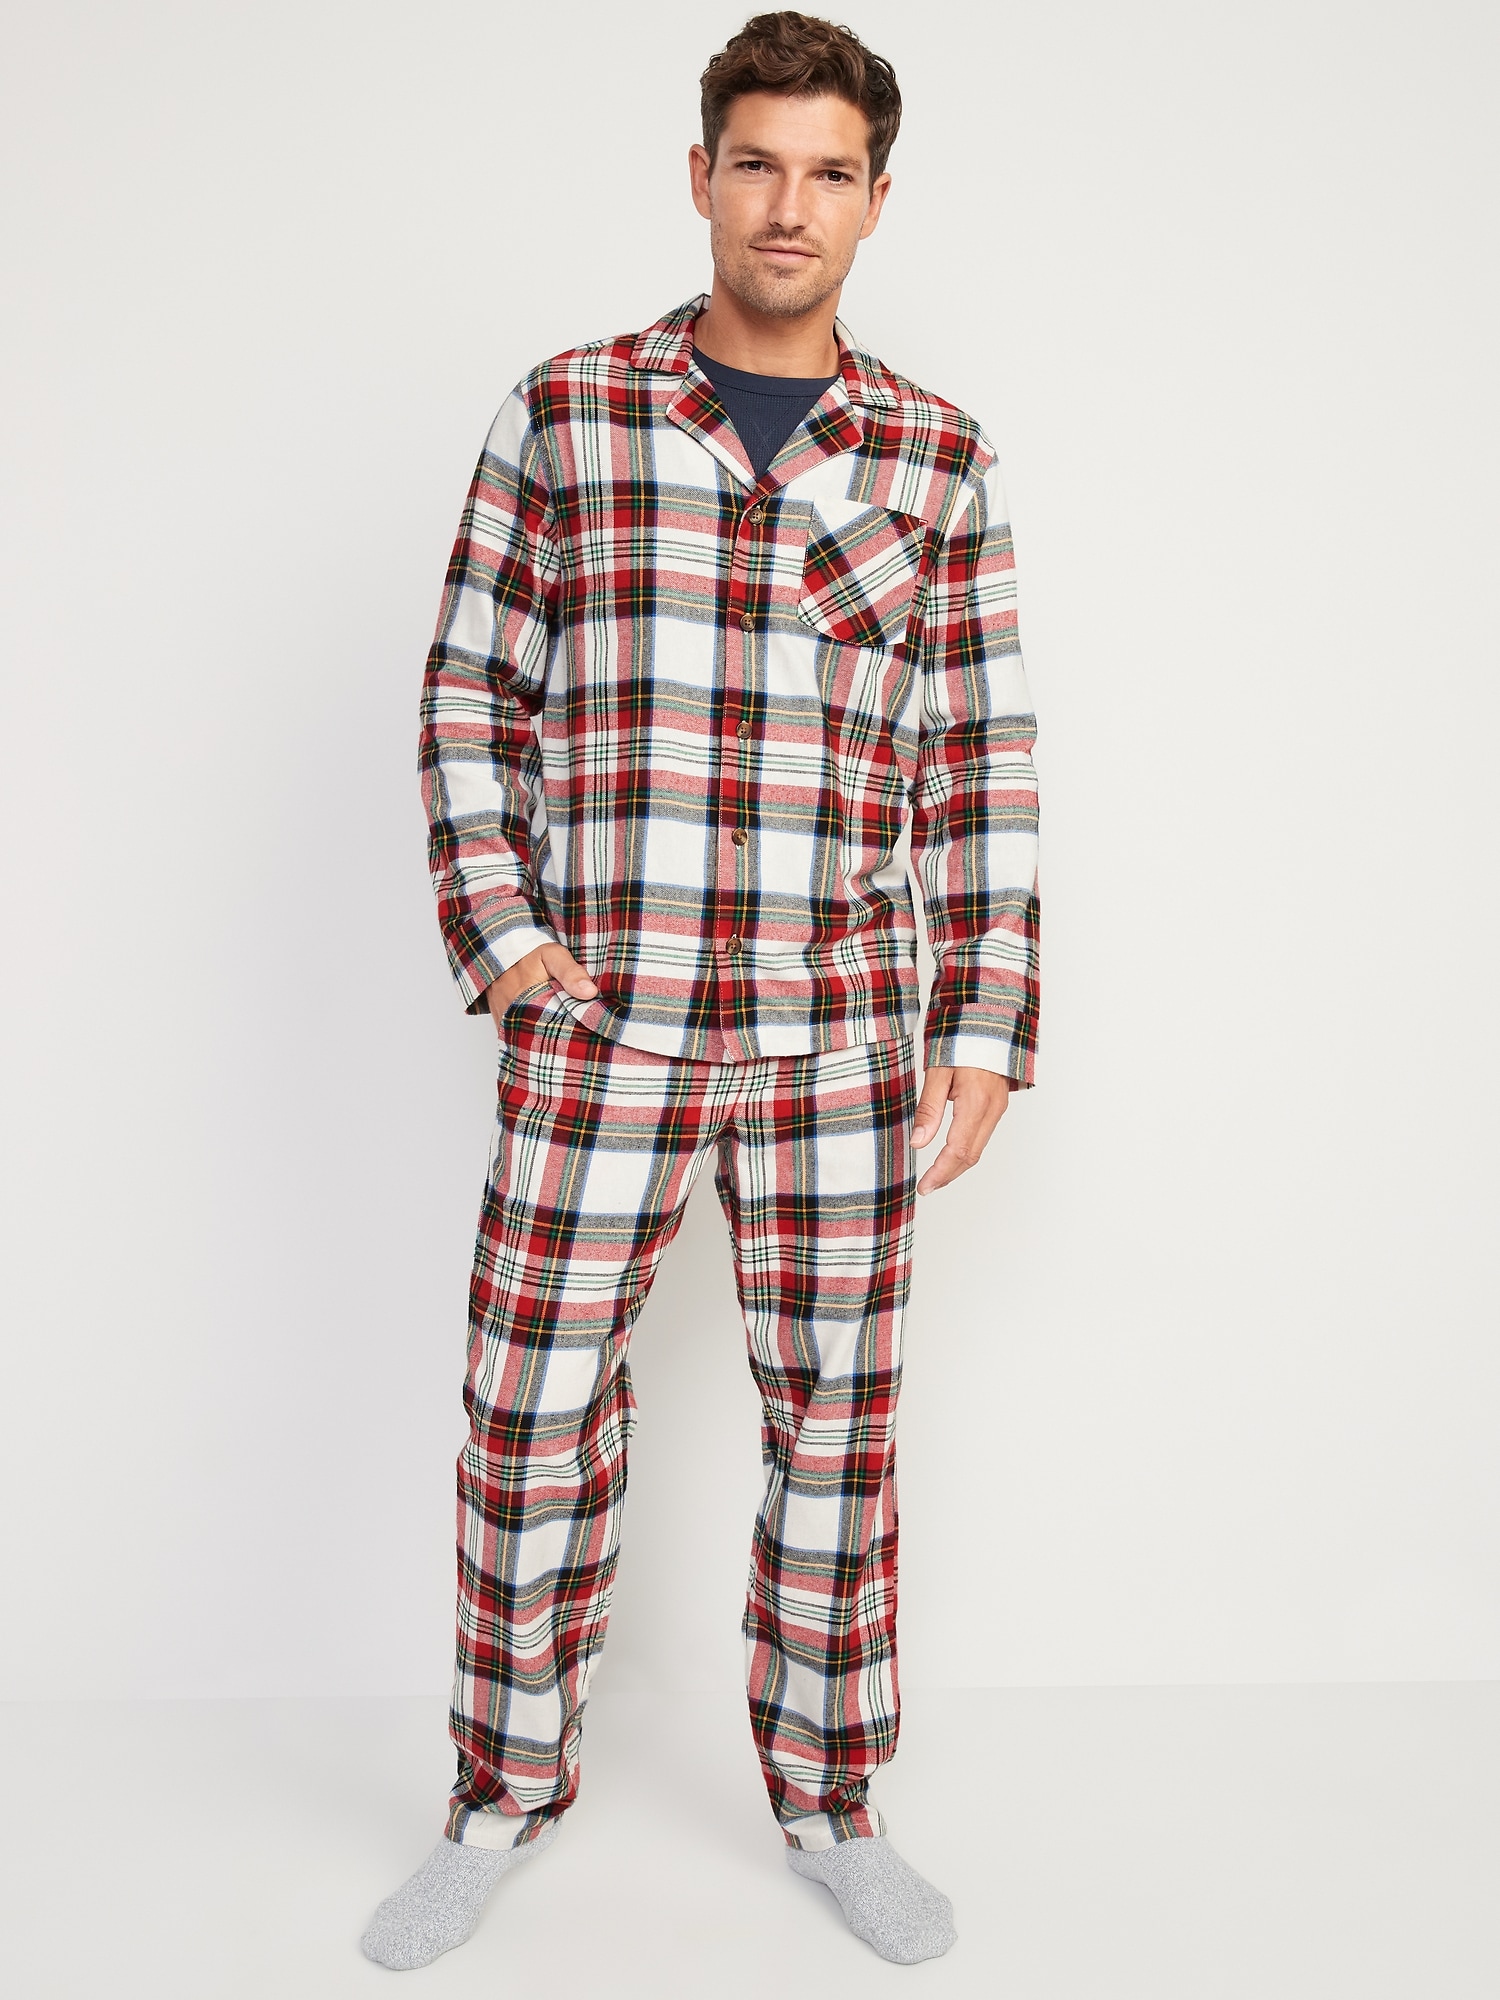 Old Navy Matching Plaid Flannel Pajama Set for Men white. 1